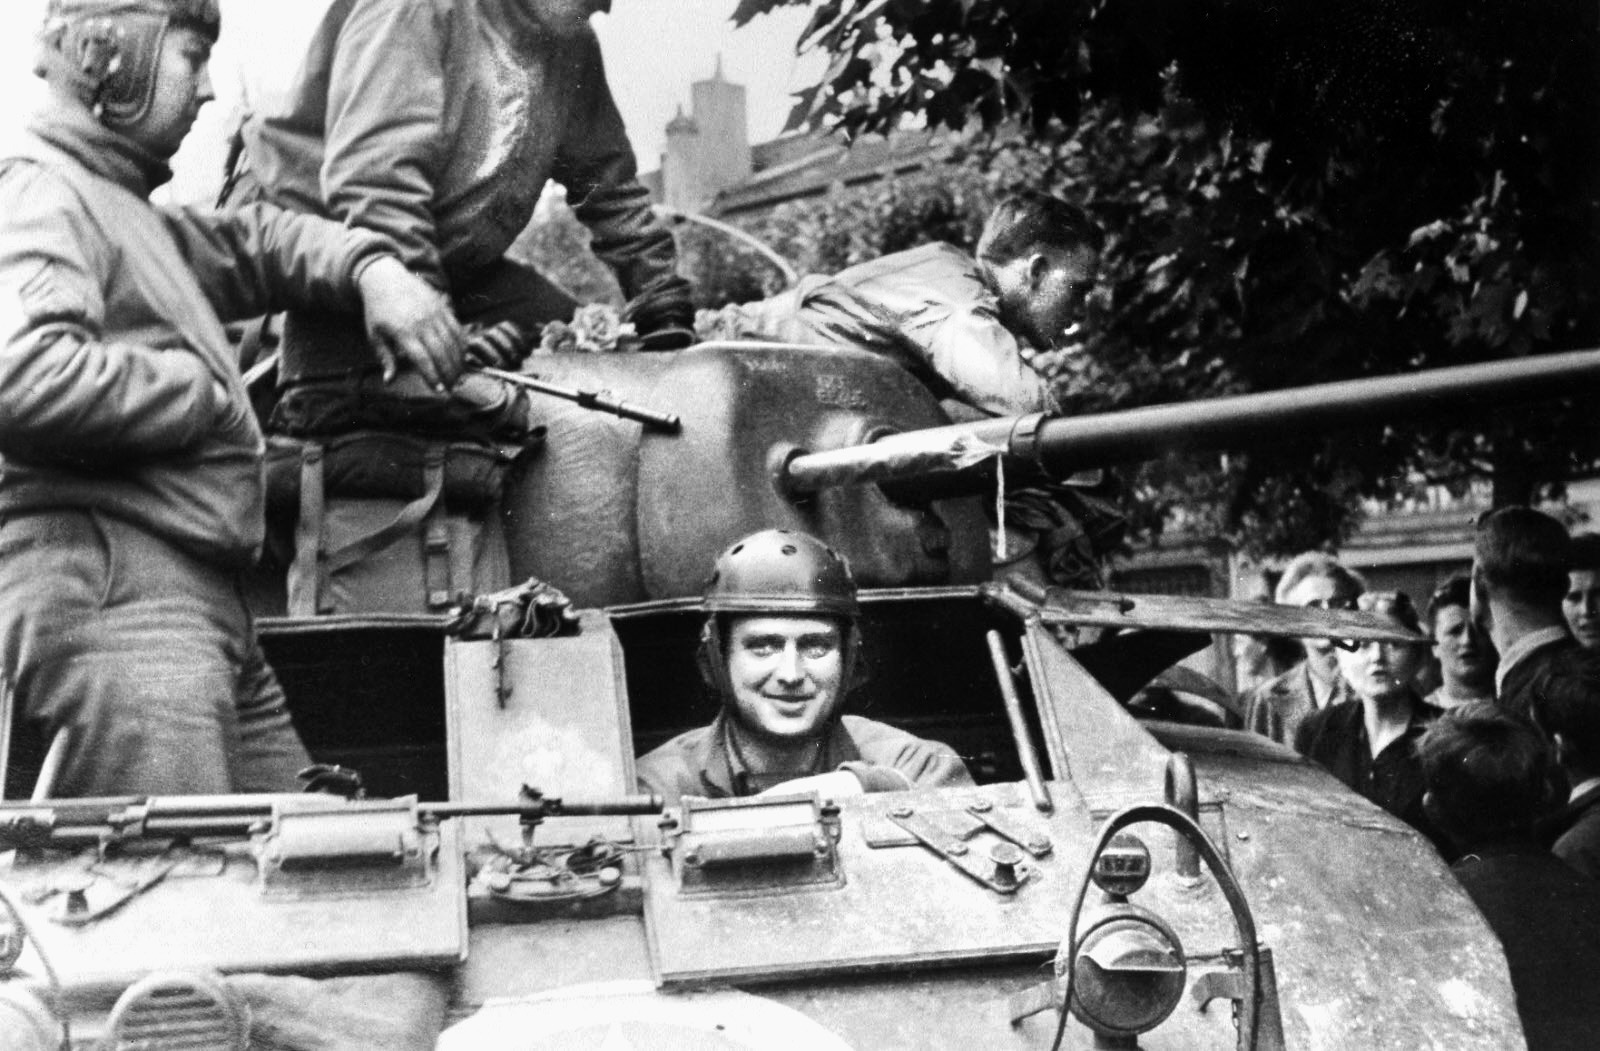 A tank crew takes a breather in the town of Luneville. The driver has just emerged from his hatch beneath the barrel of the 37mm main weapon. 